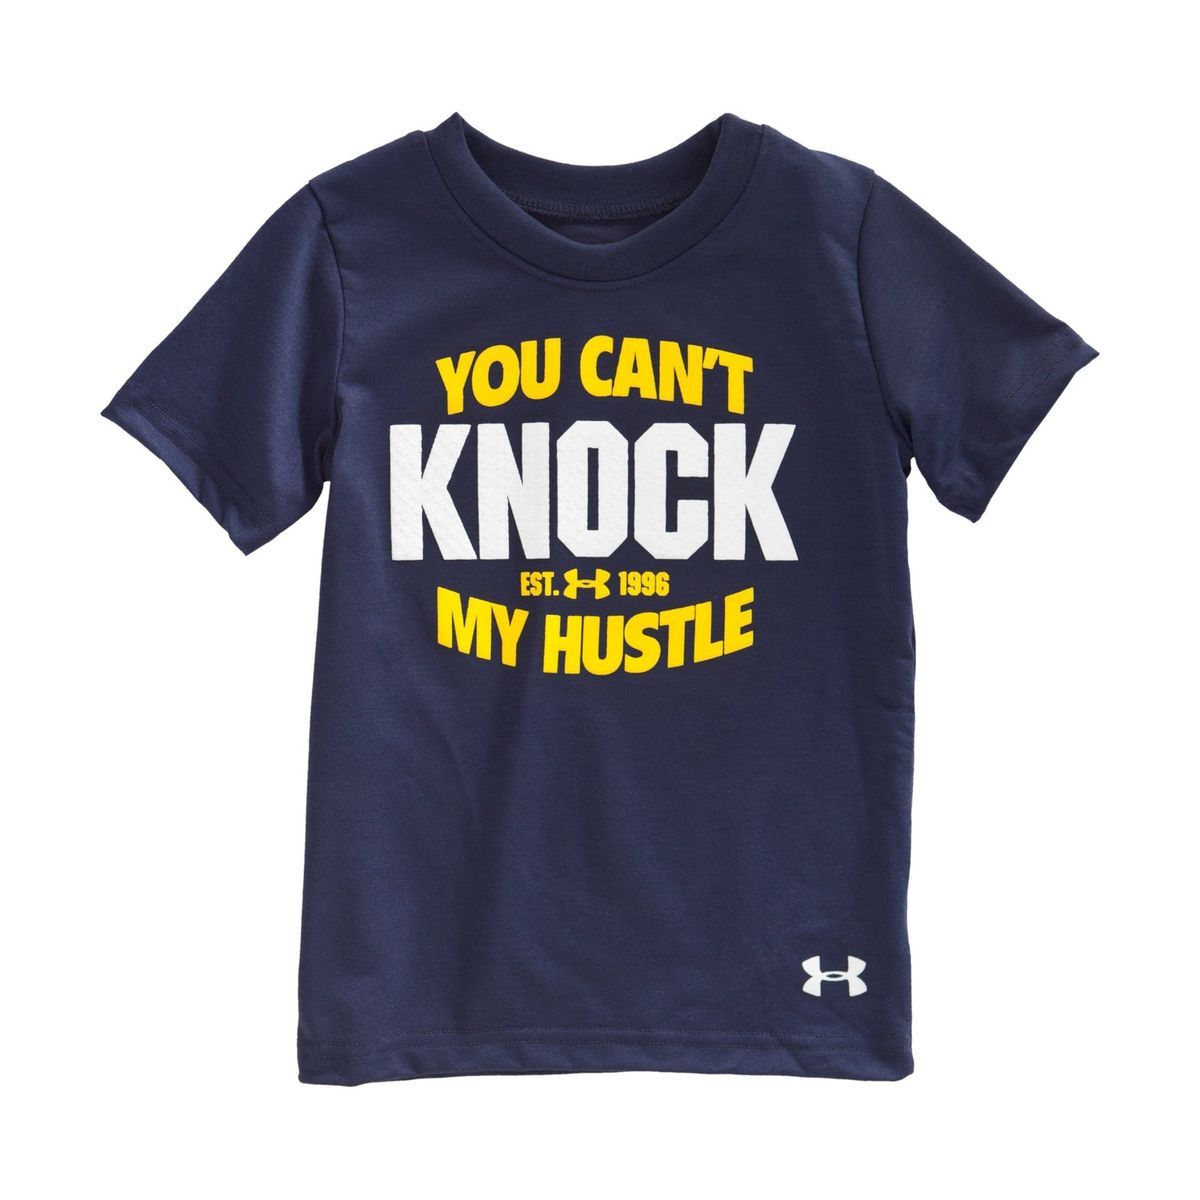 Boys Toddler Under Armour CanT Knock My Hustle T Shirt